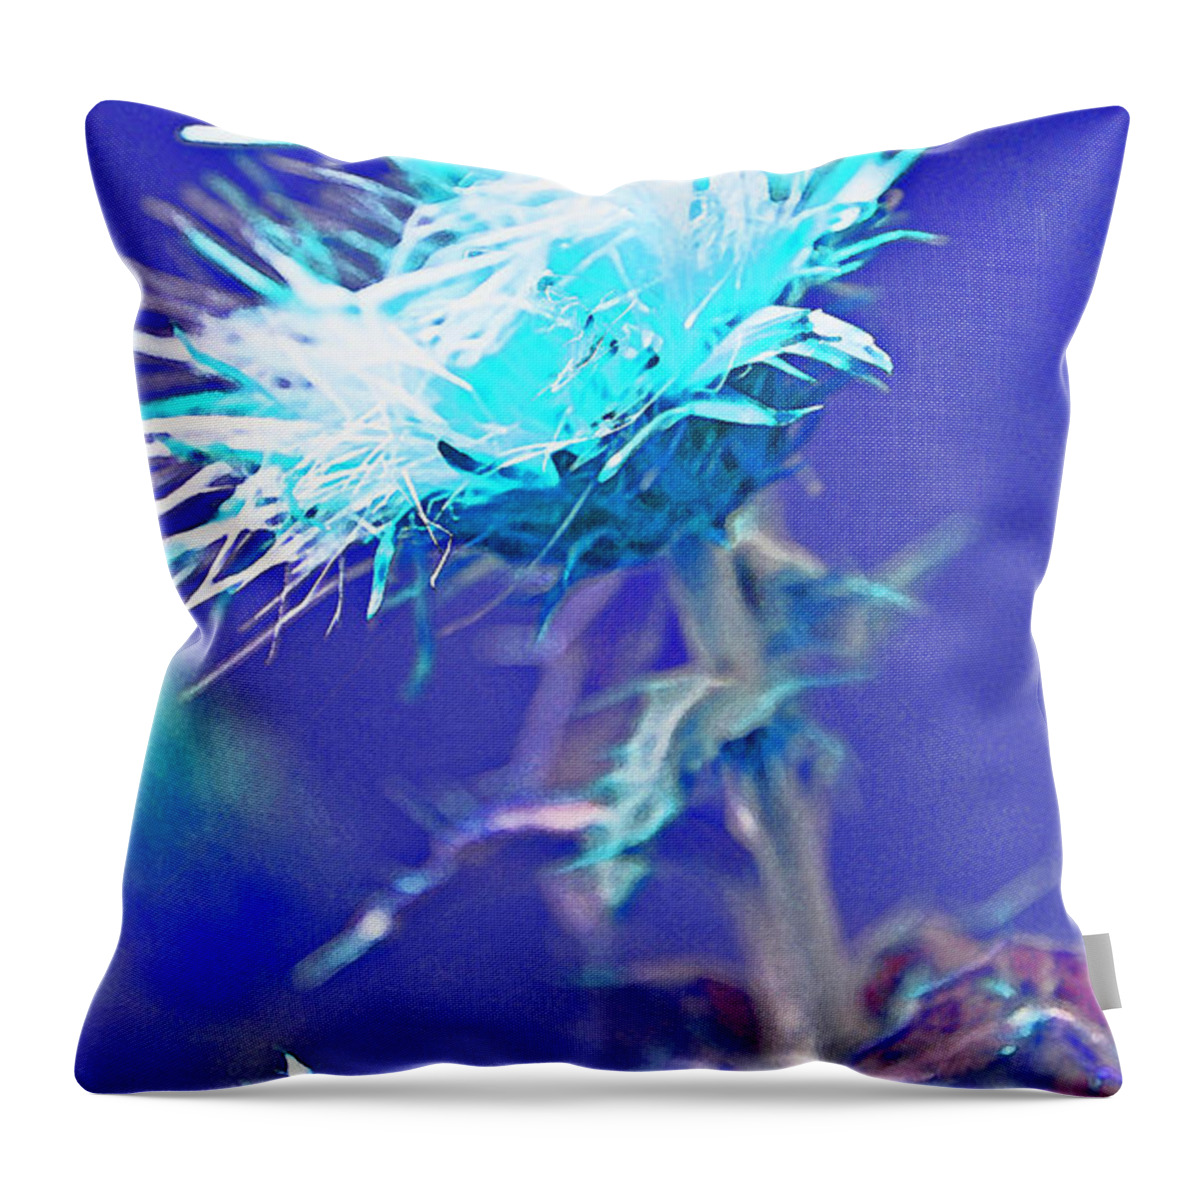 Weeds Throw Pillow featuring the photograph Bright Accident by Julie Lueders 